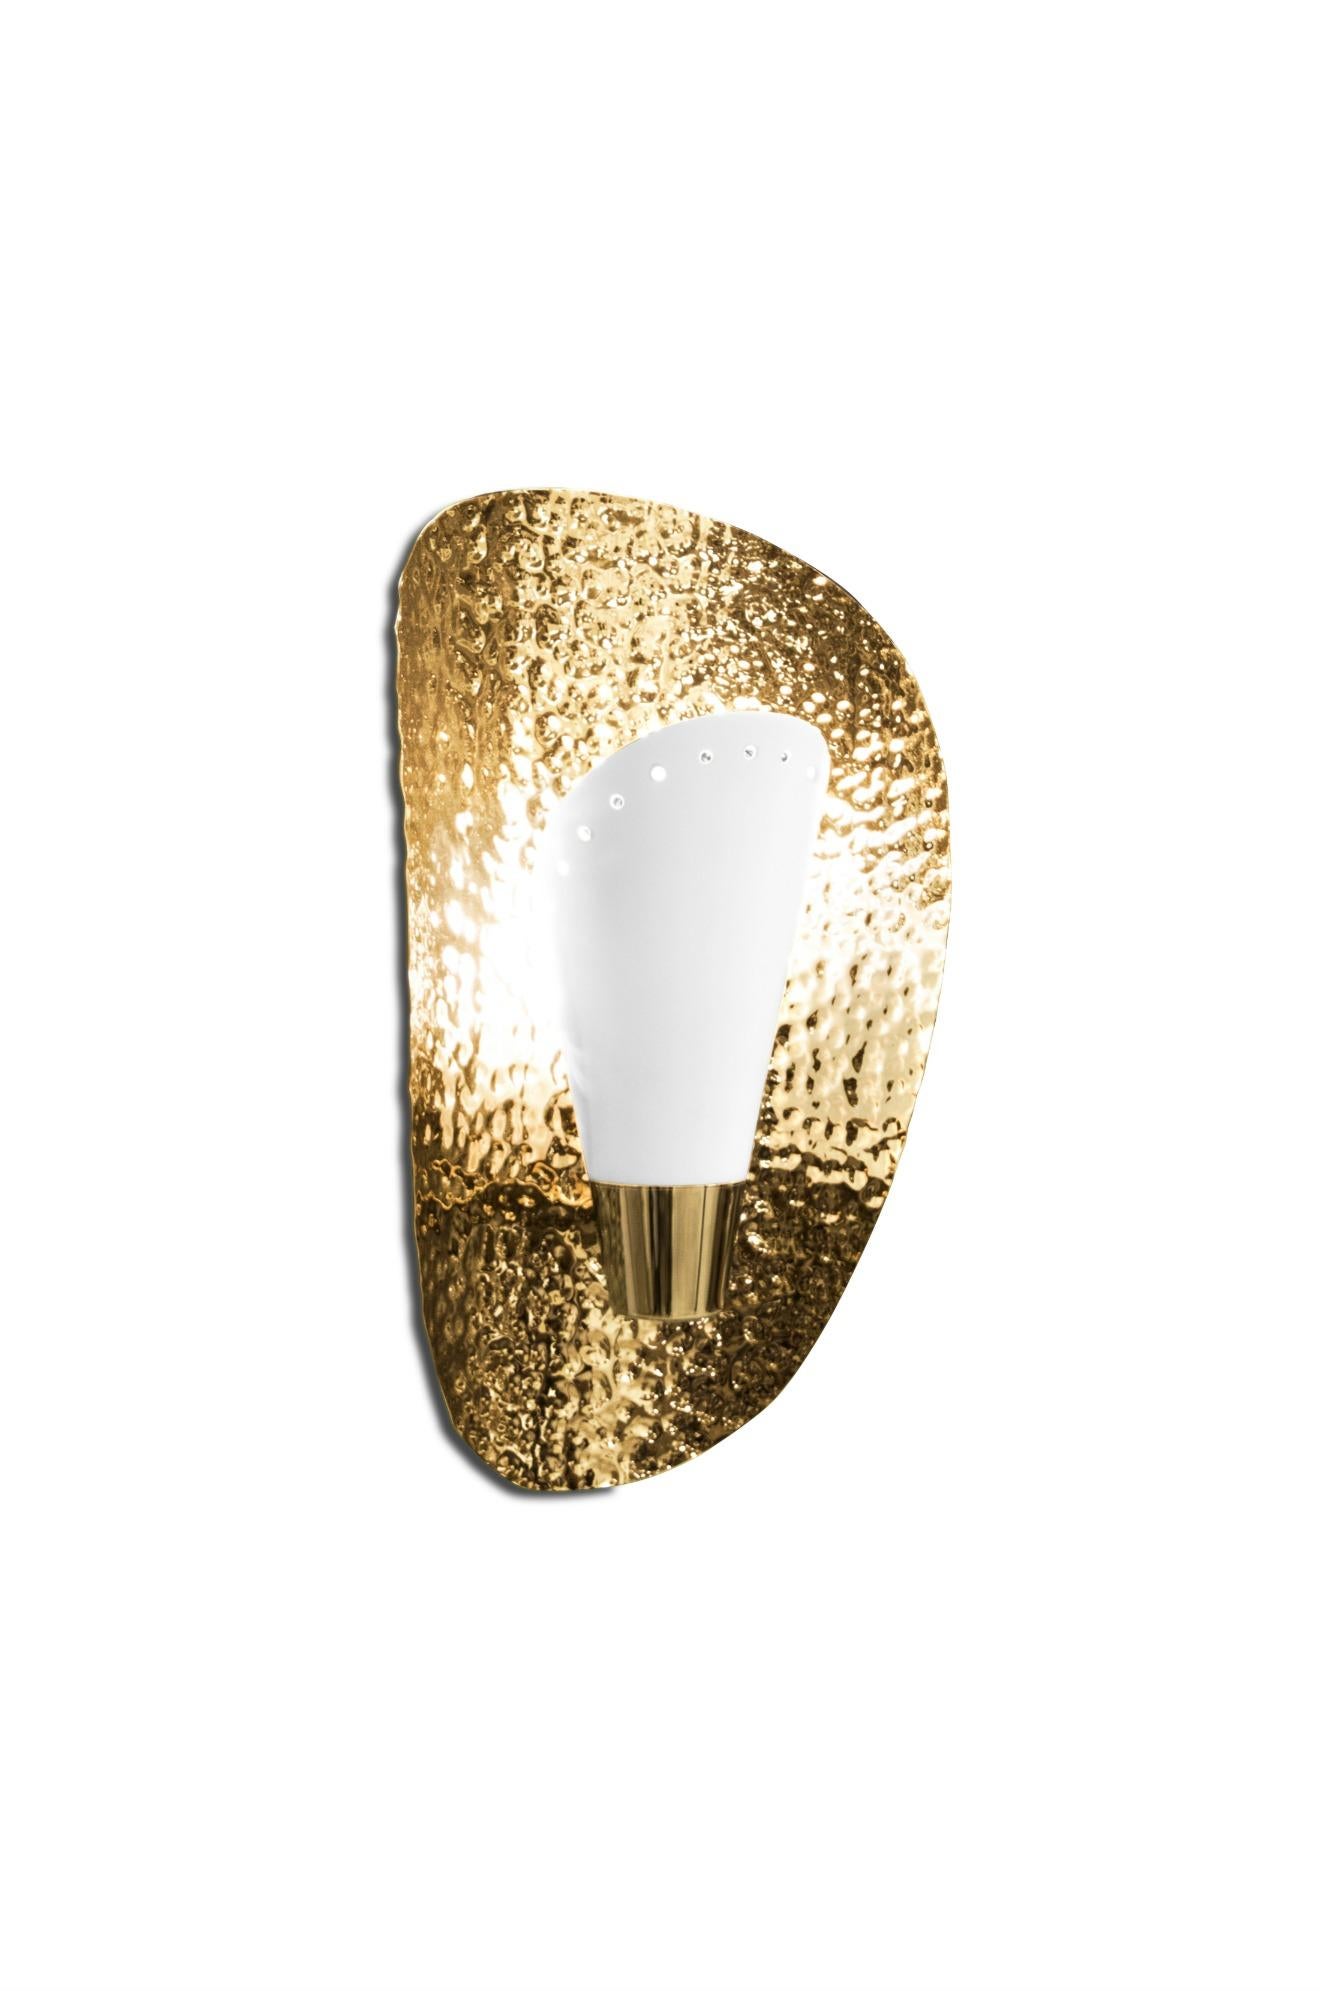 Aruna Sconce with Black Shade in Hammered Gold Plated Brass Shell In New Condition For Sale In New York, NY